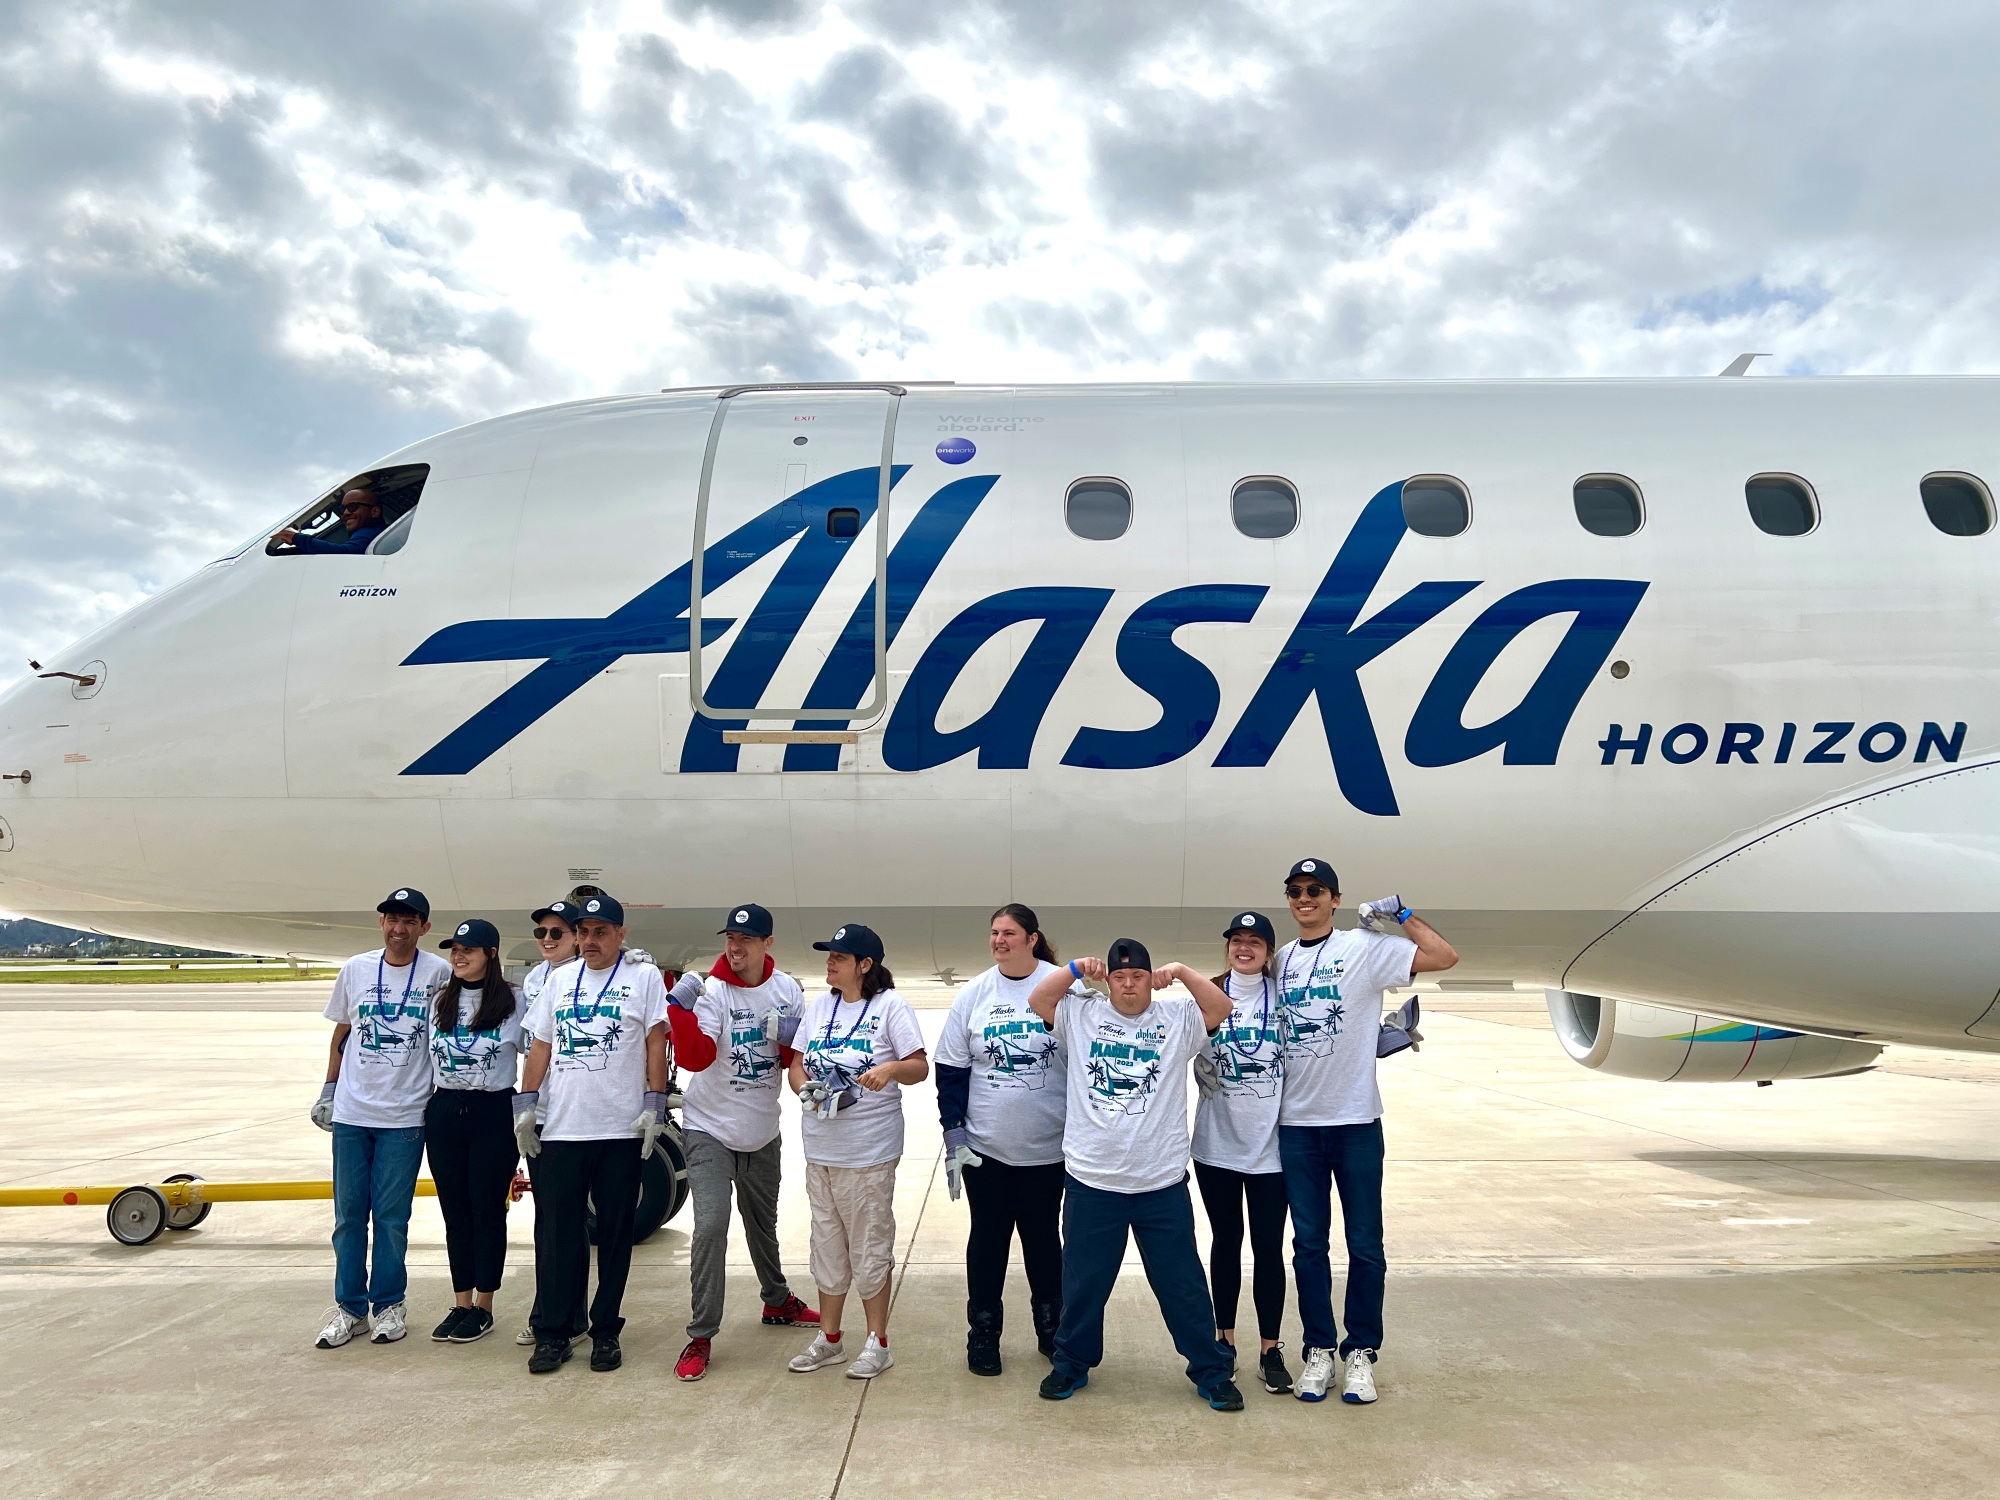 A group of people stand in front of an Alaska Airlines plane wearing Plane Pull t-shirts